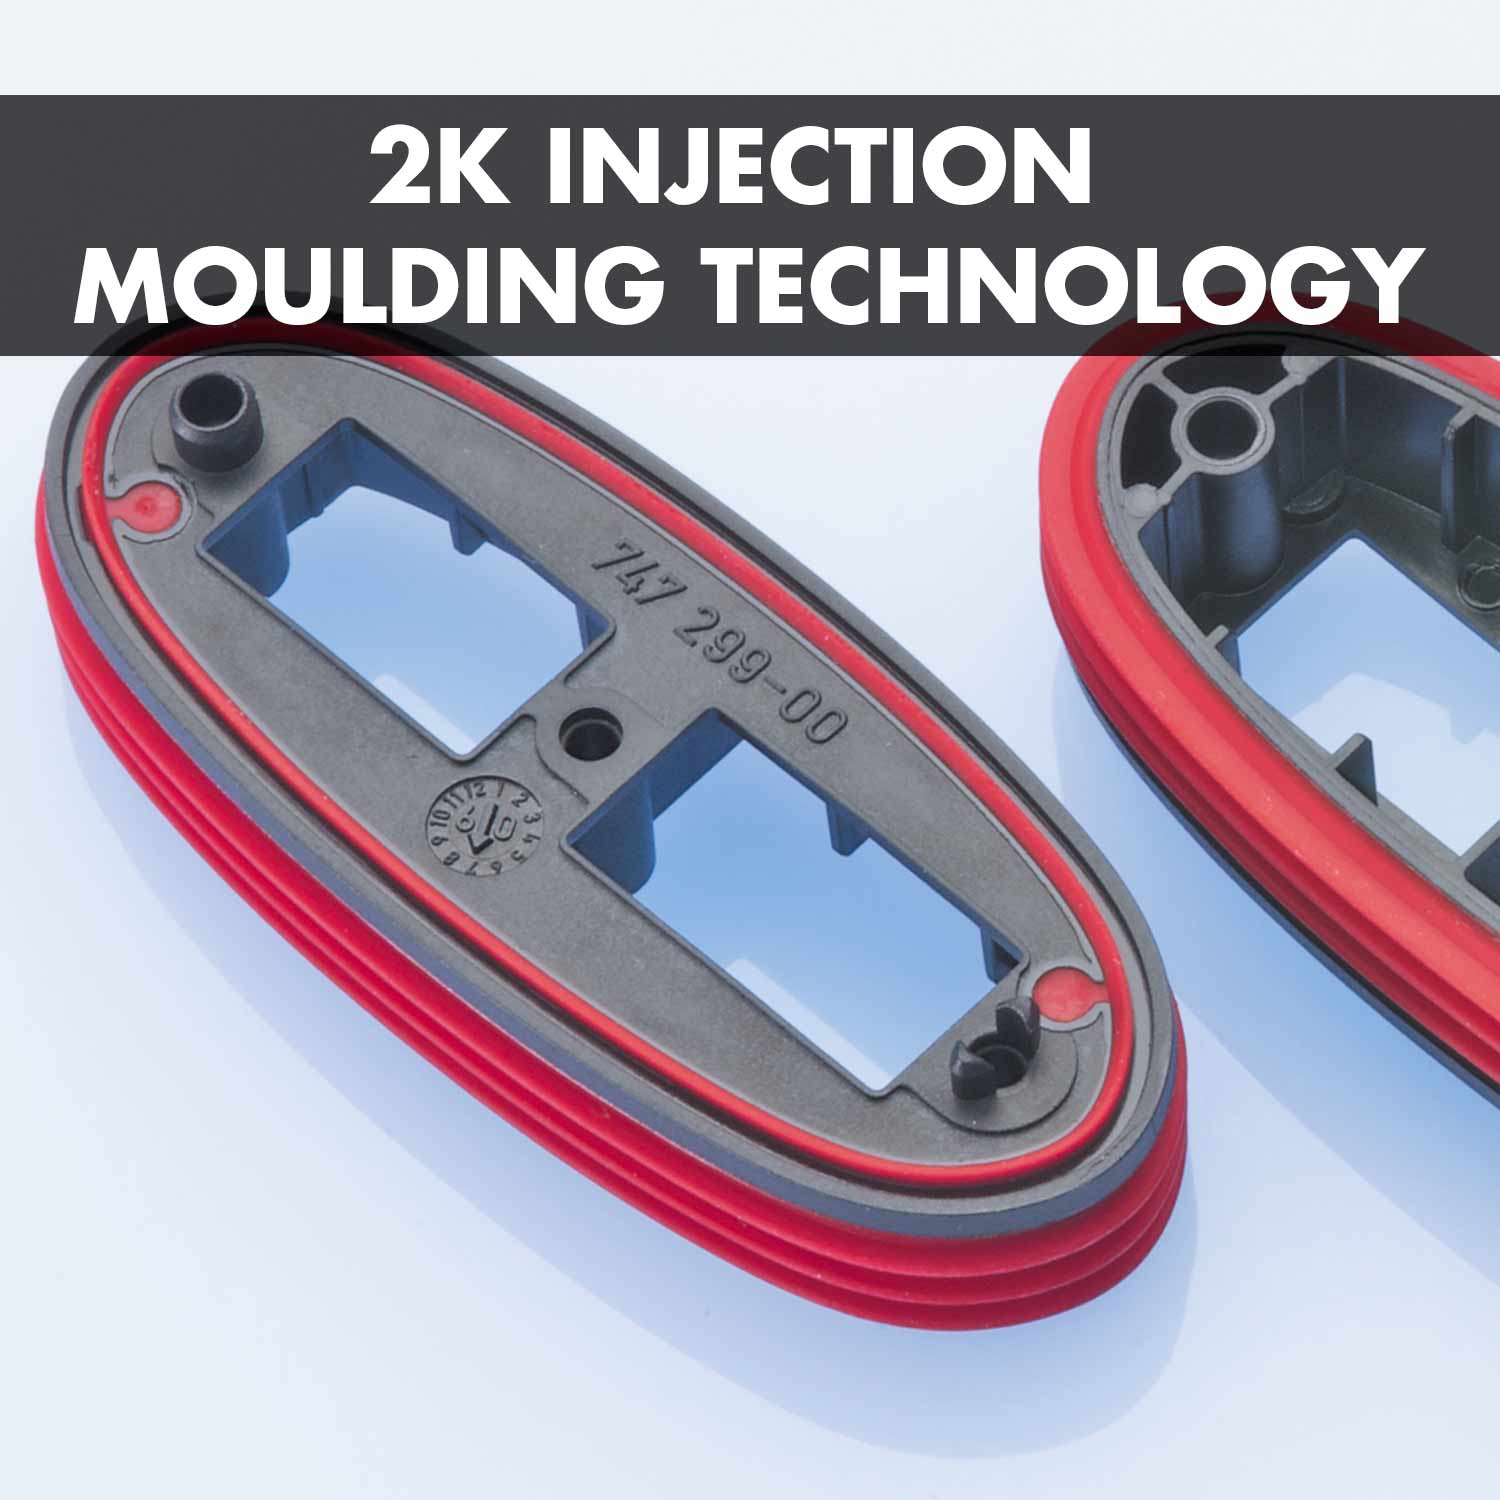 2-Component injection moulding technology: Thermoplastics and elastomer manufacture in a single process.